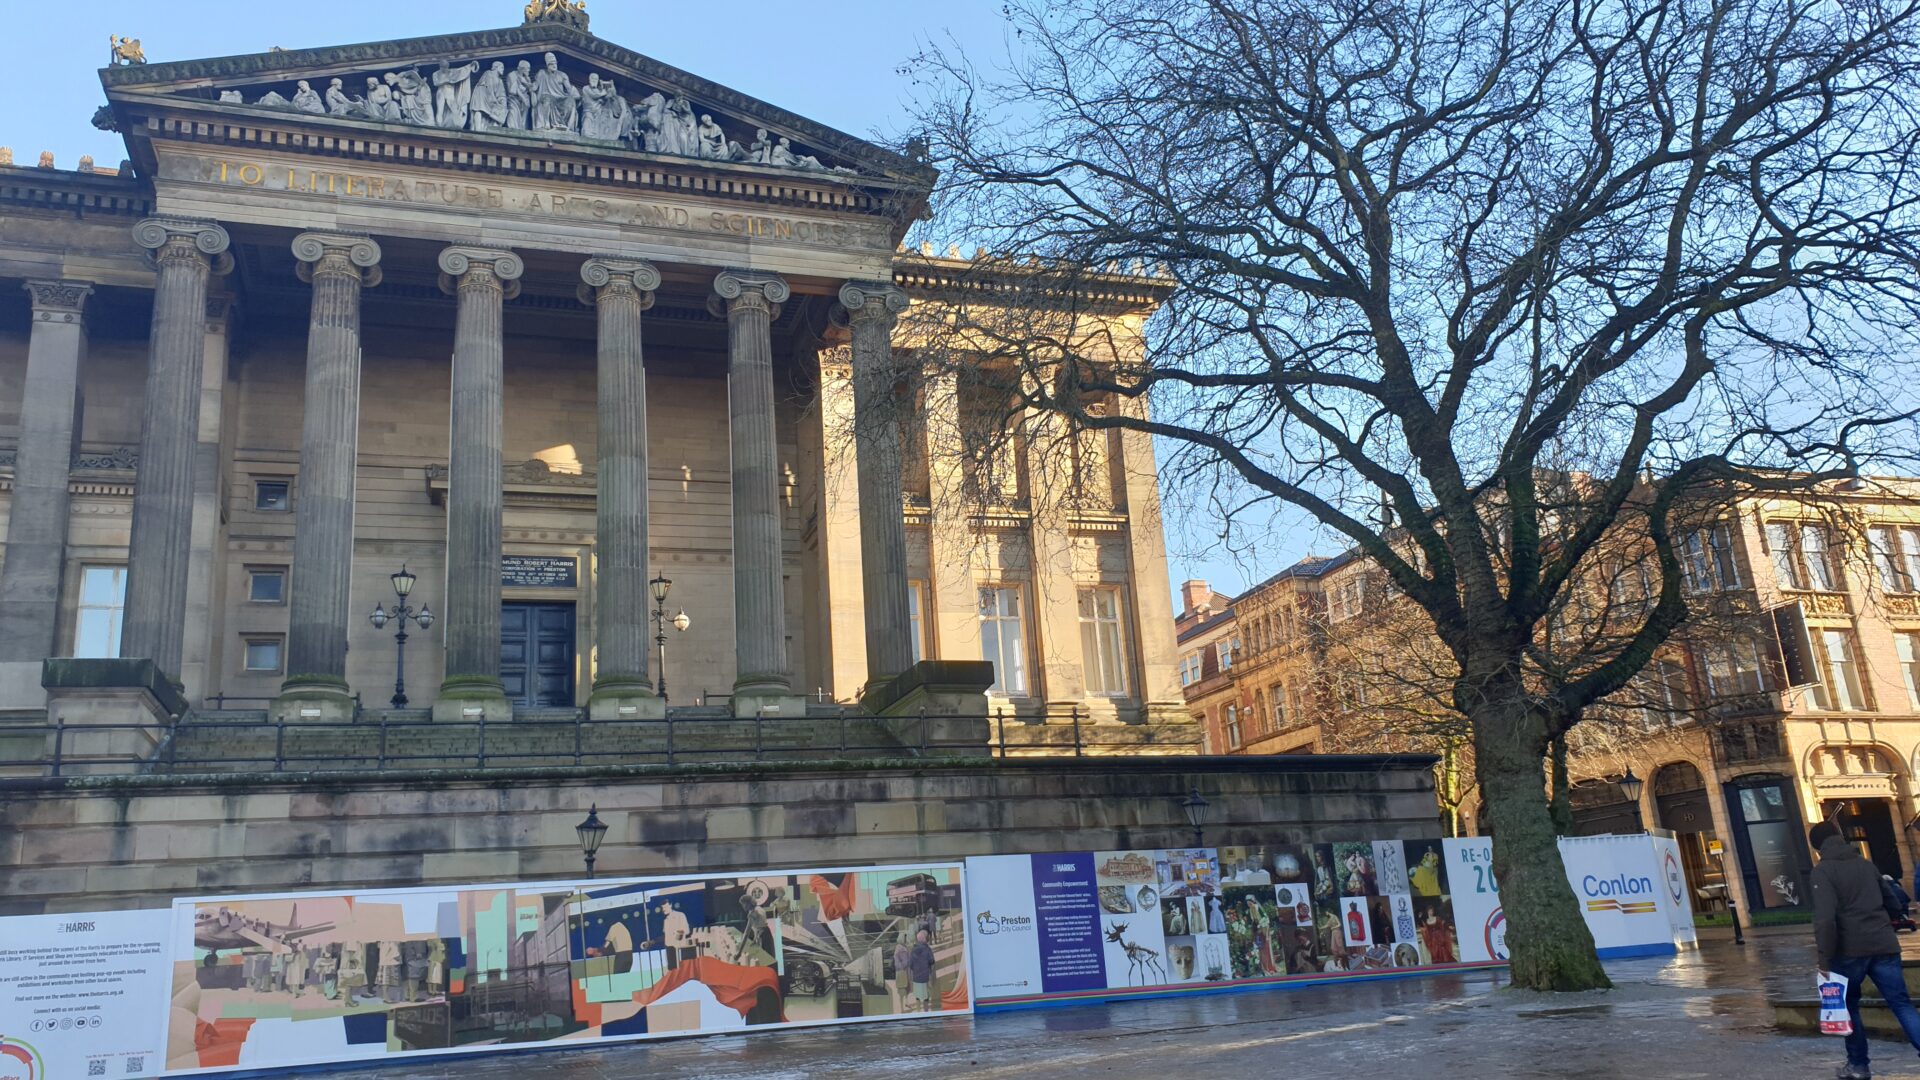 Image of the Harris exterior with colourful hoarding design